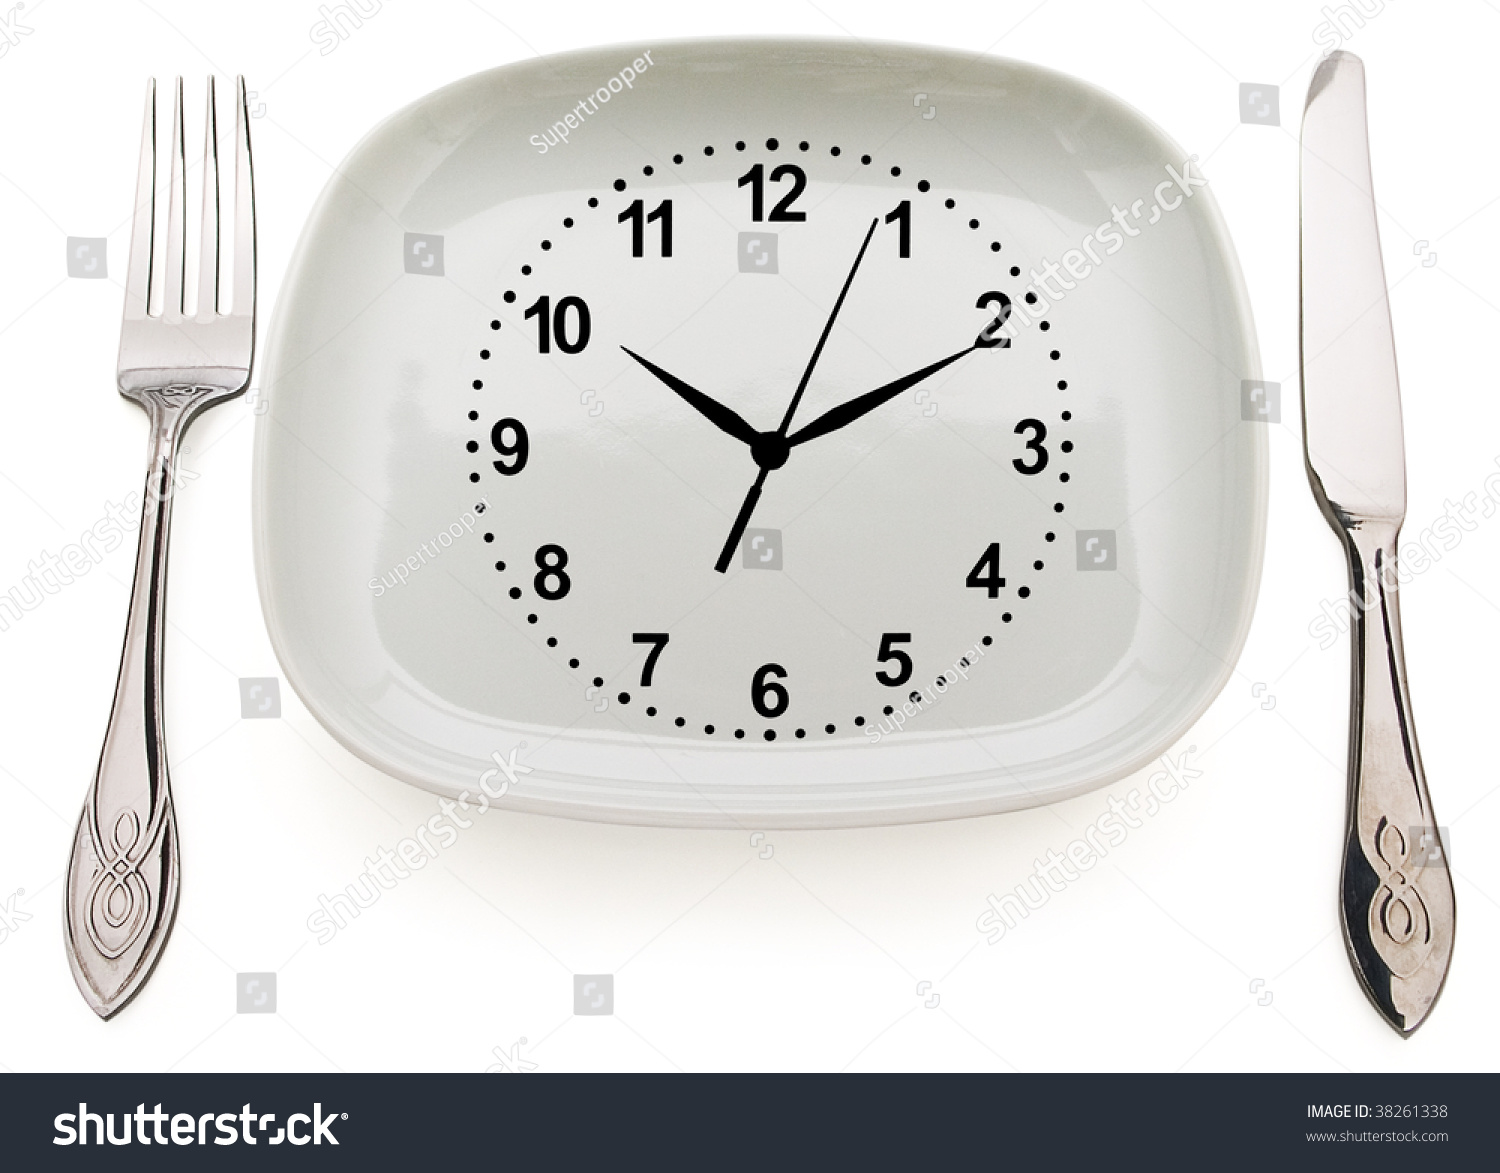 http://image.shutterstock.com/z/stock-photo-dishware-and-clock-concept-restrictions-in-food-38261338.jpg